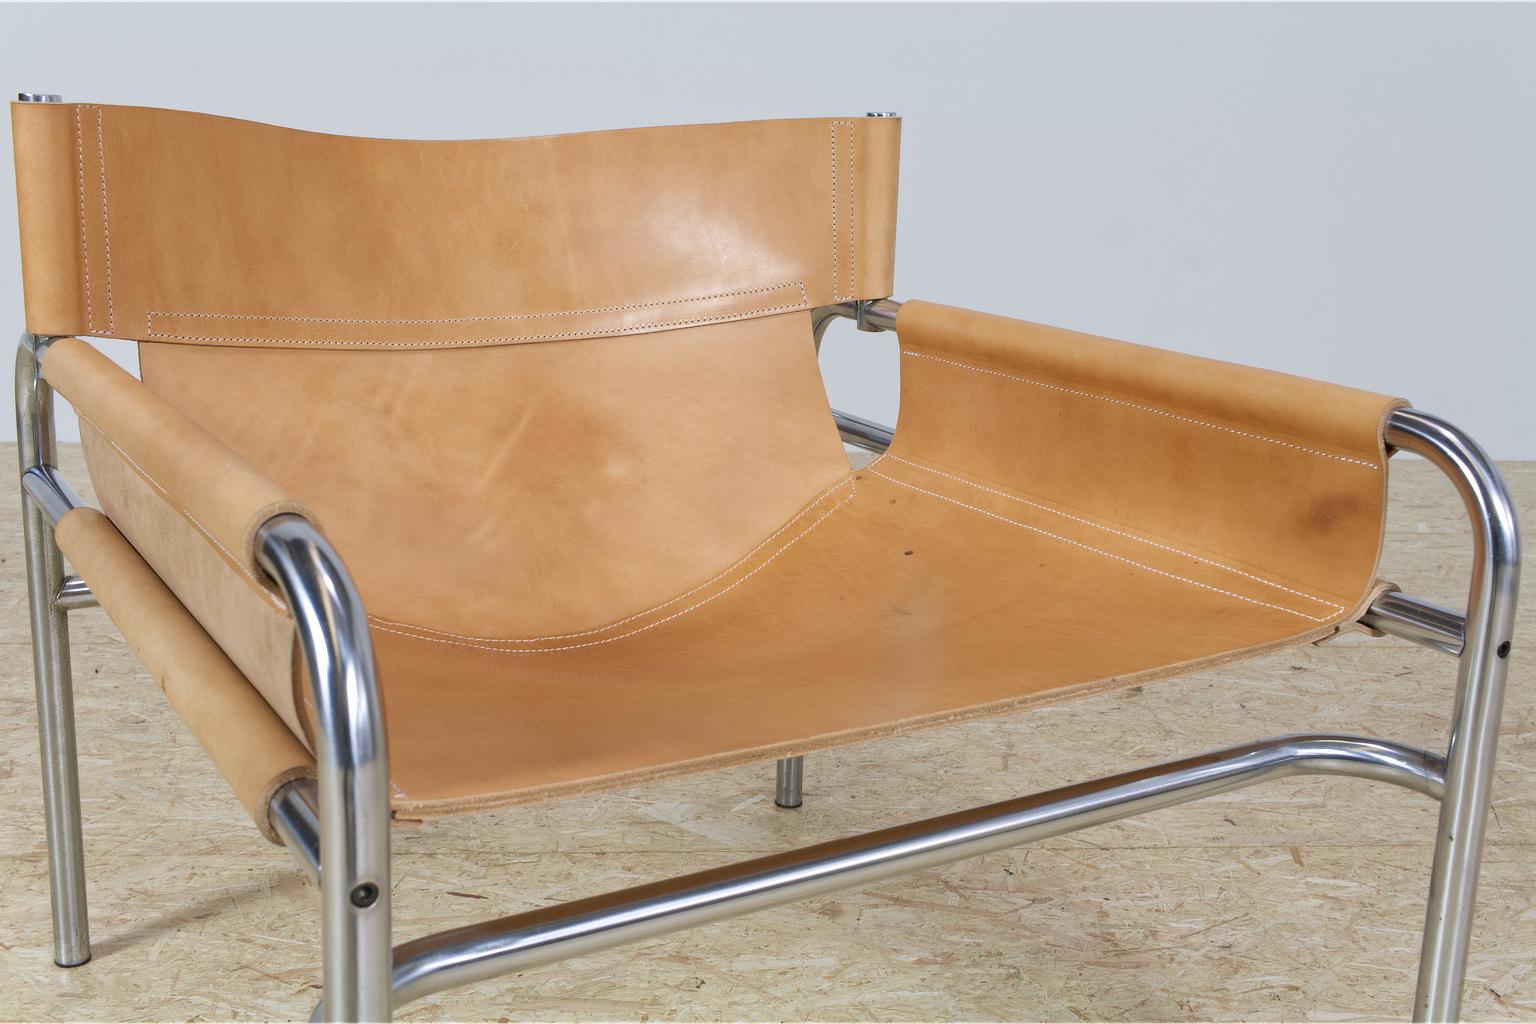 Late 20th Century Mid-Century Modernist Lounge Chairs in Saddle Leather by Walter Antonis, 1974 For Sale